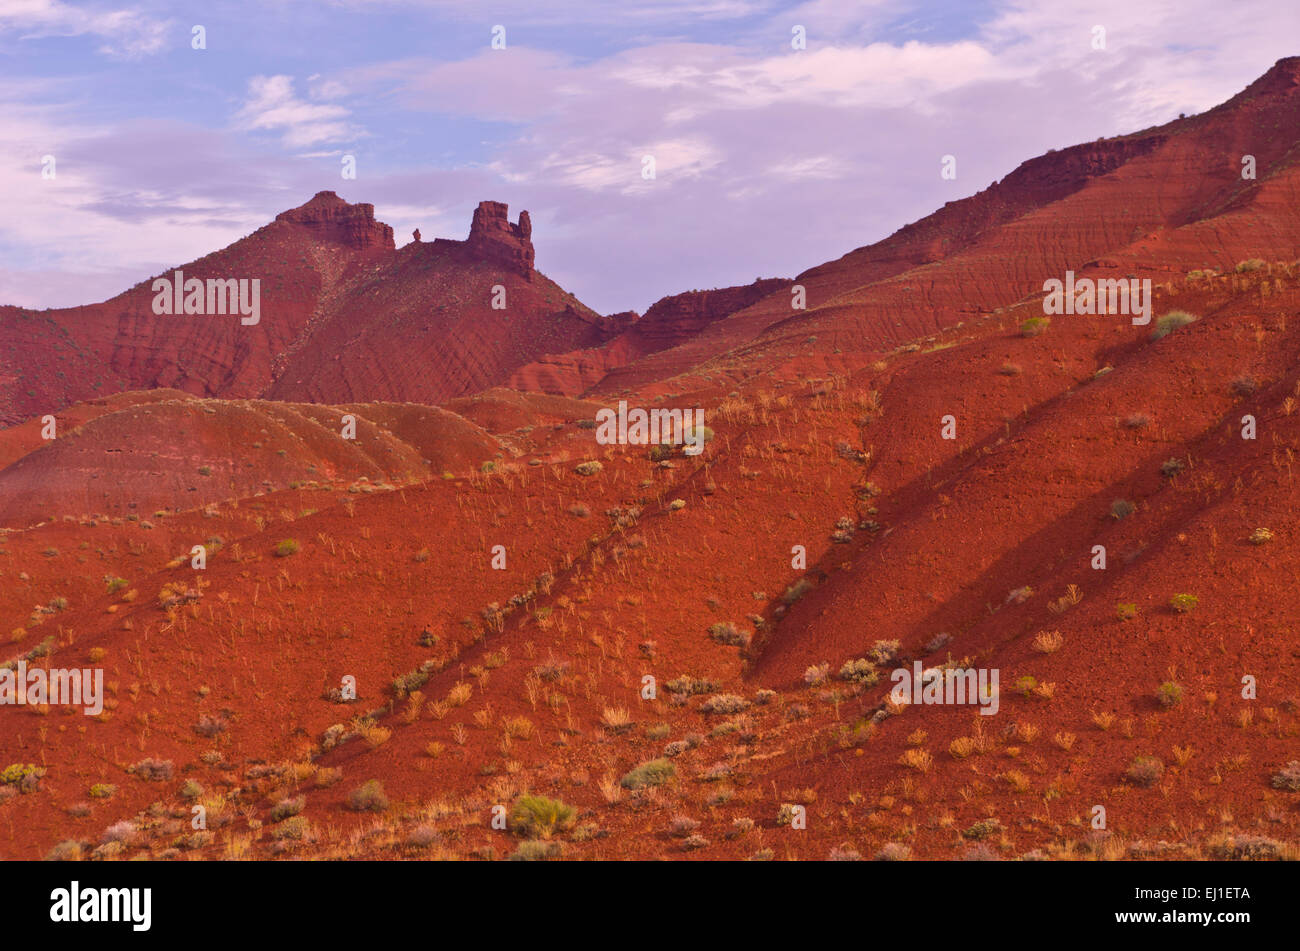 Red desert hills at the entrance to Castle Valley, near Arches National Park, Utah, United States. Stock Photo